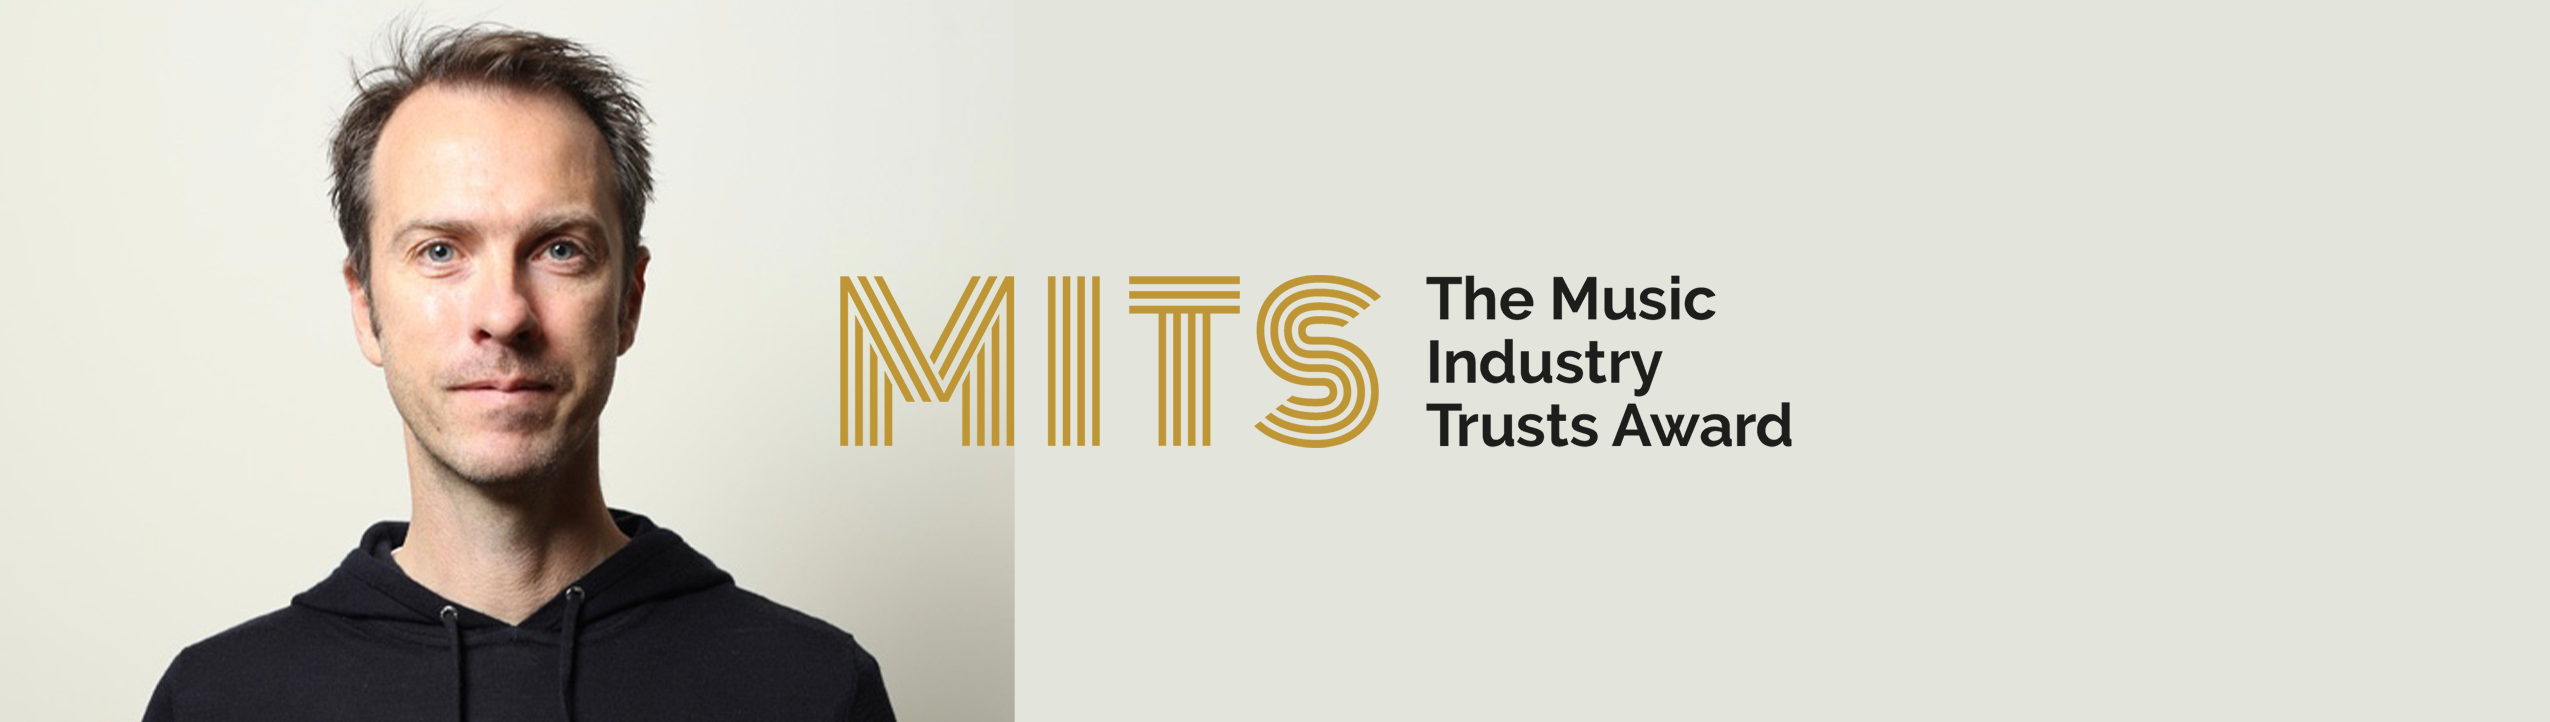 BRIT Trust Diaries: Toby Leighton-Pope, MD TEG Europe and Co-Chair of The Music Industry Trusts (MITS) Award